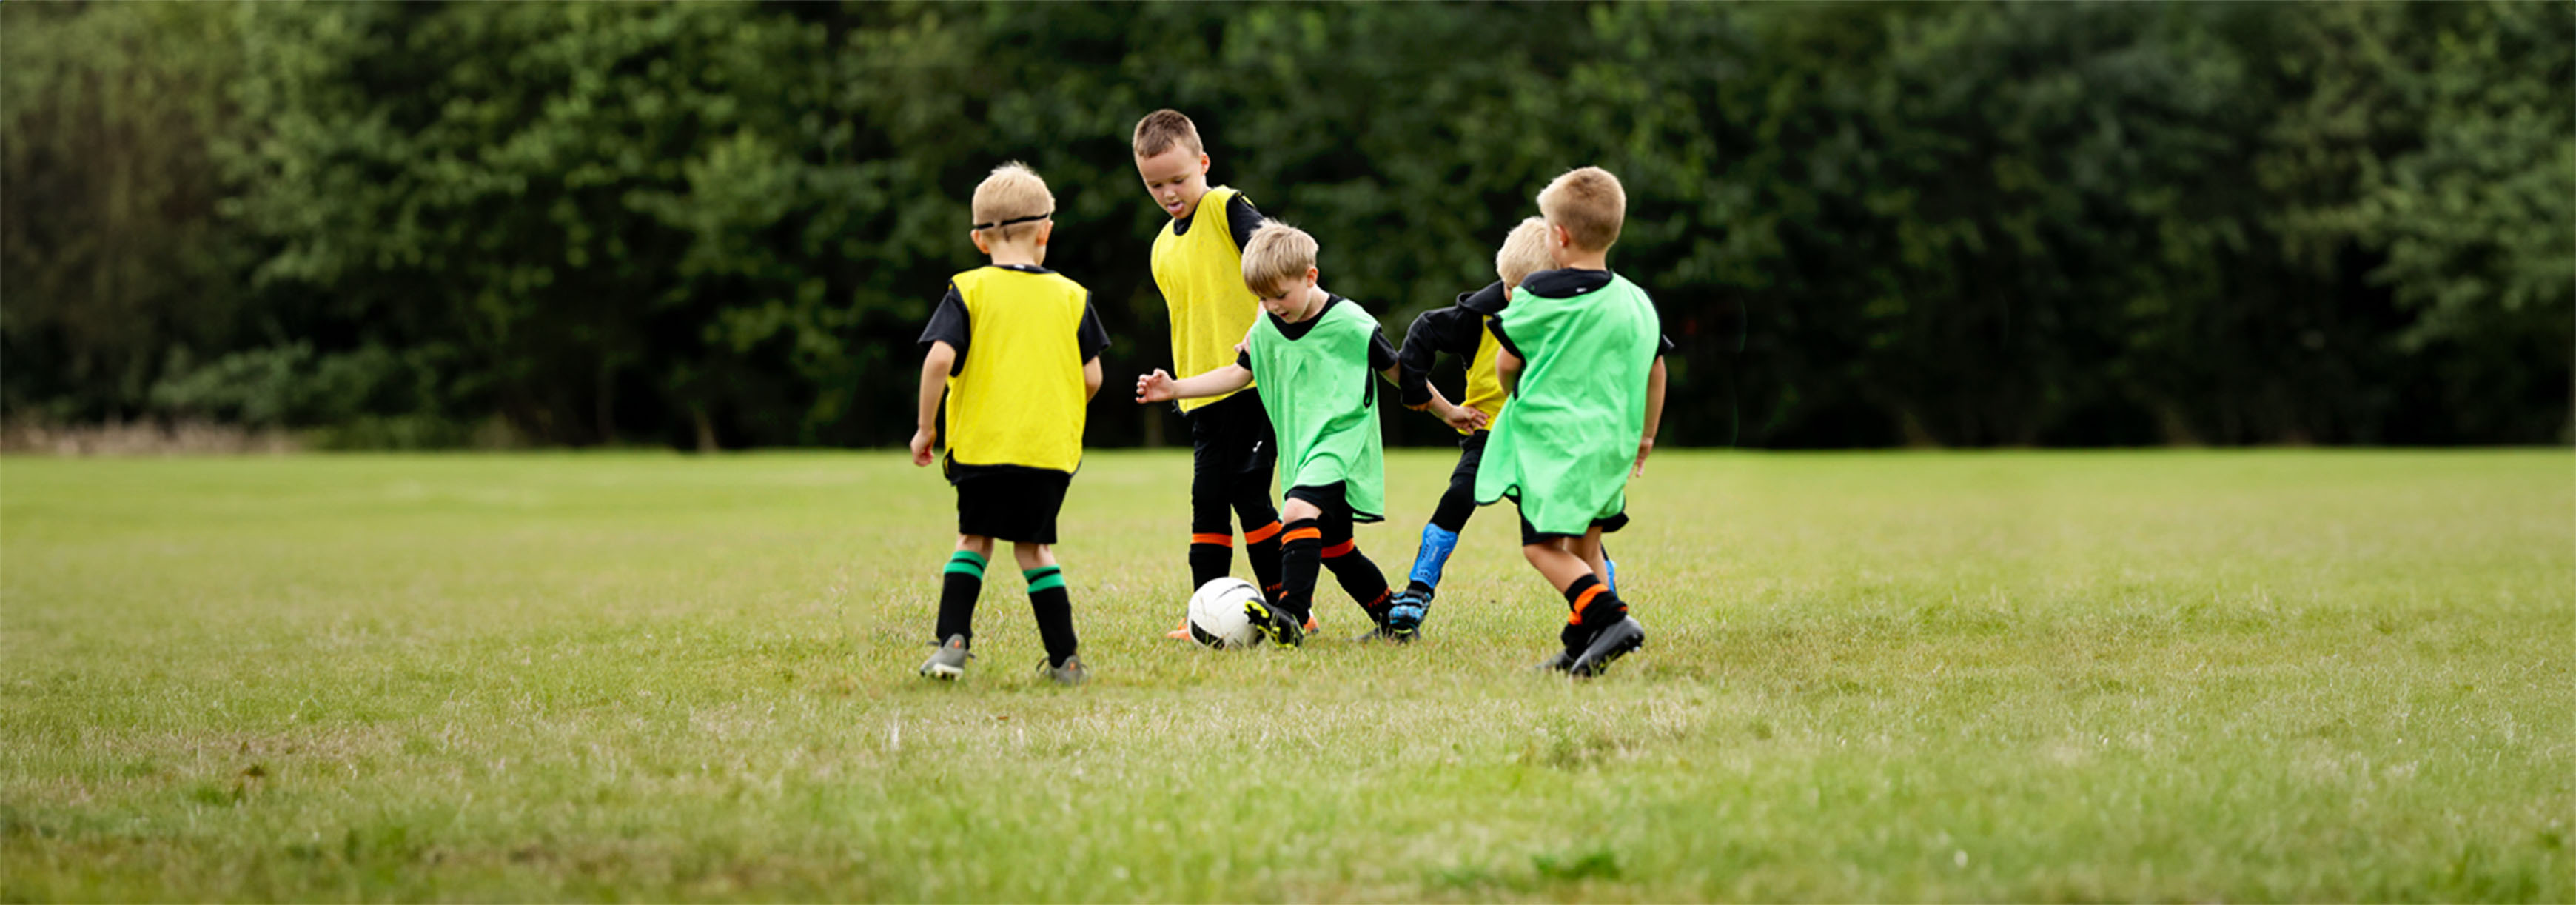 Five boys in the Play Phase take part in a small-sided game on a grass field.